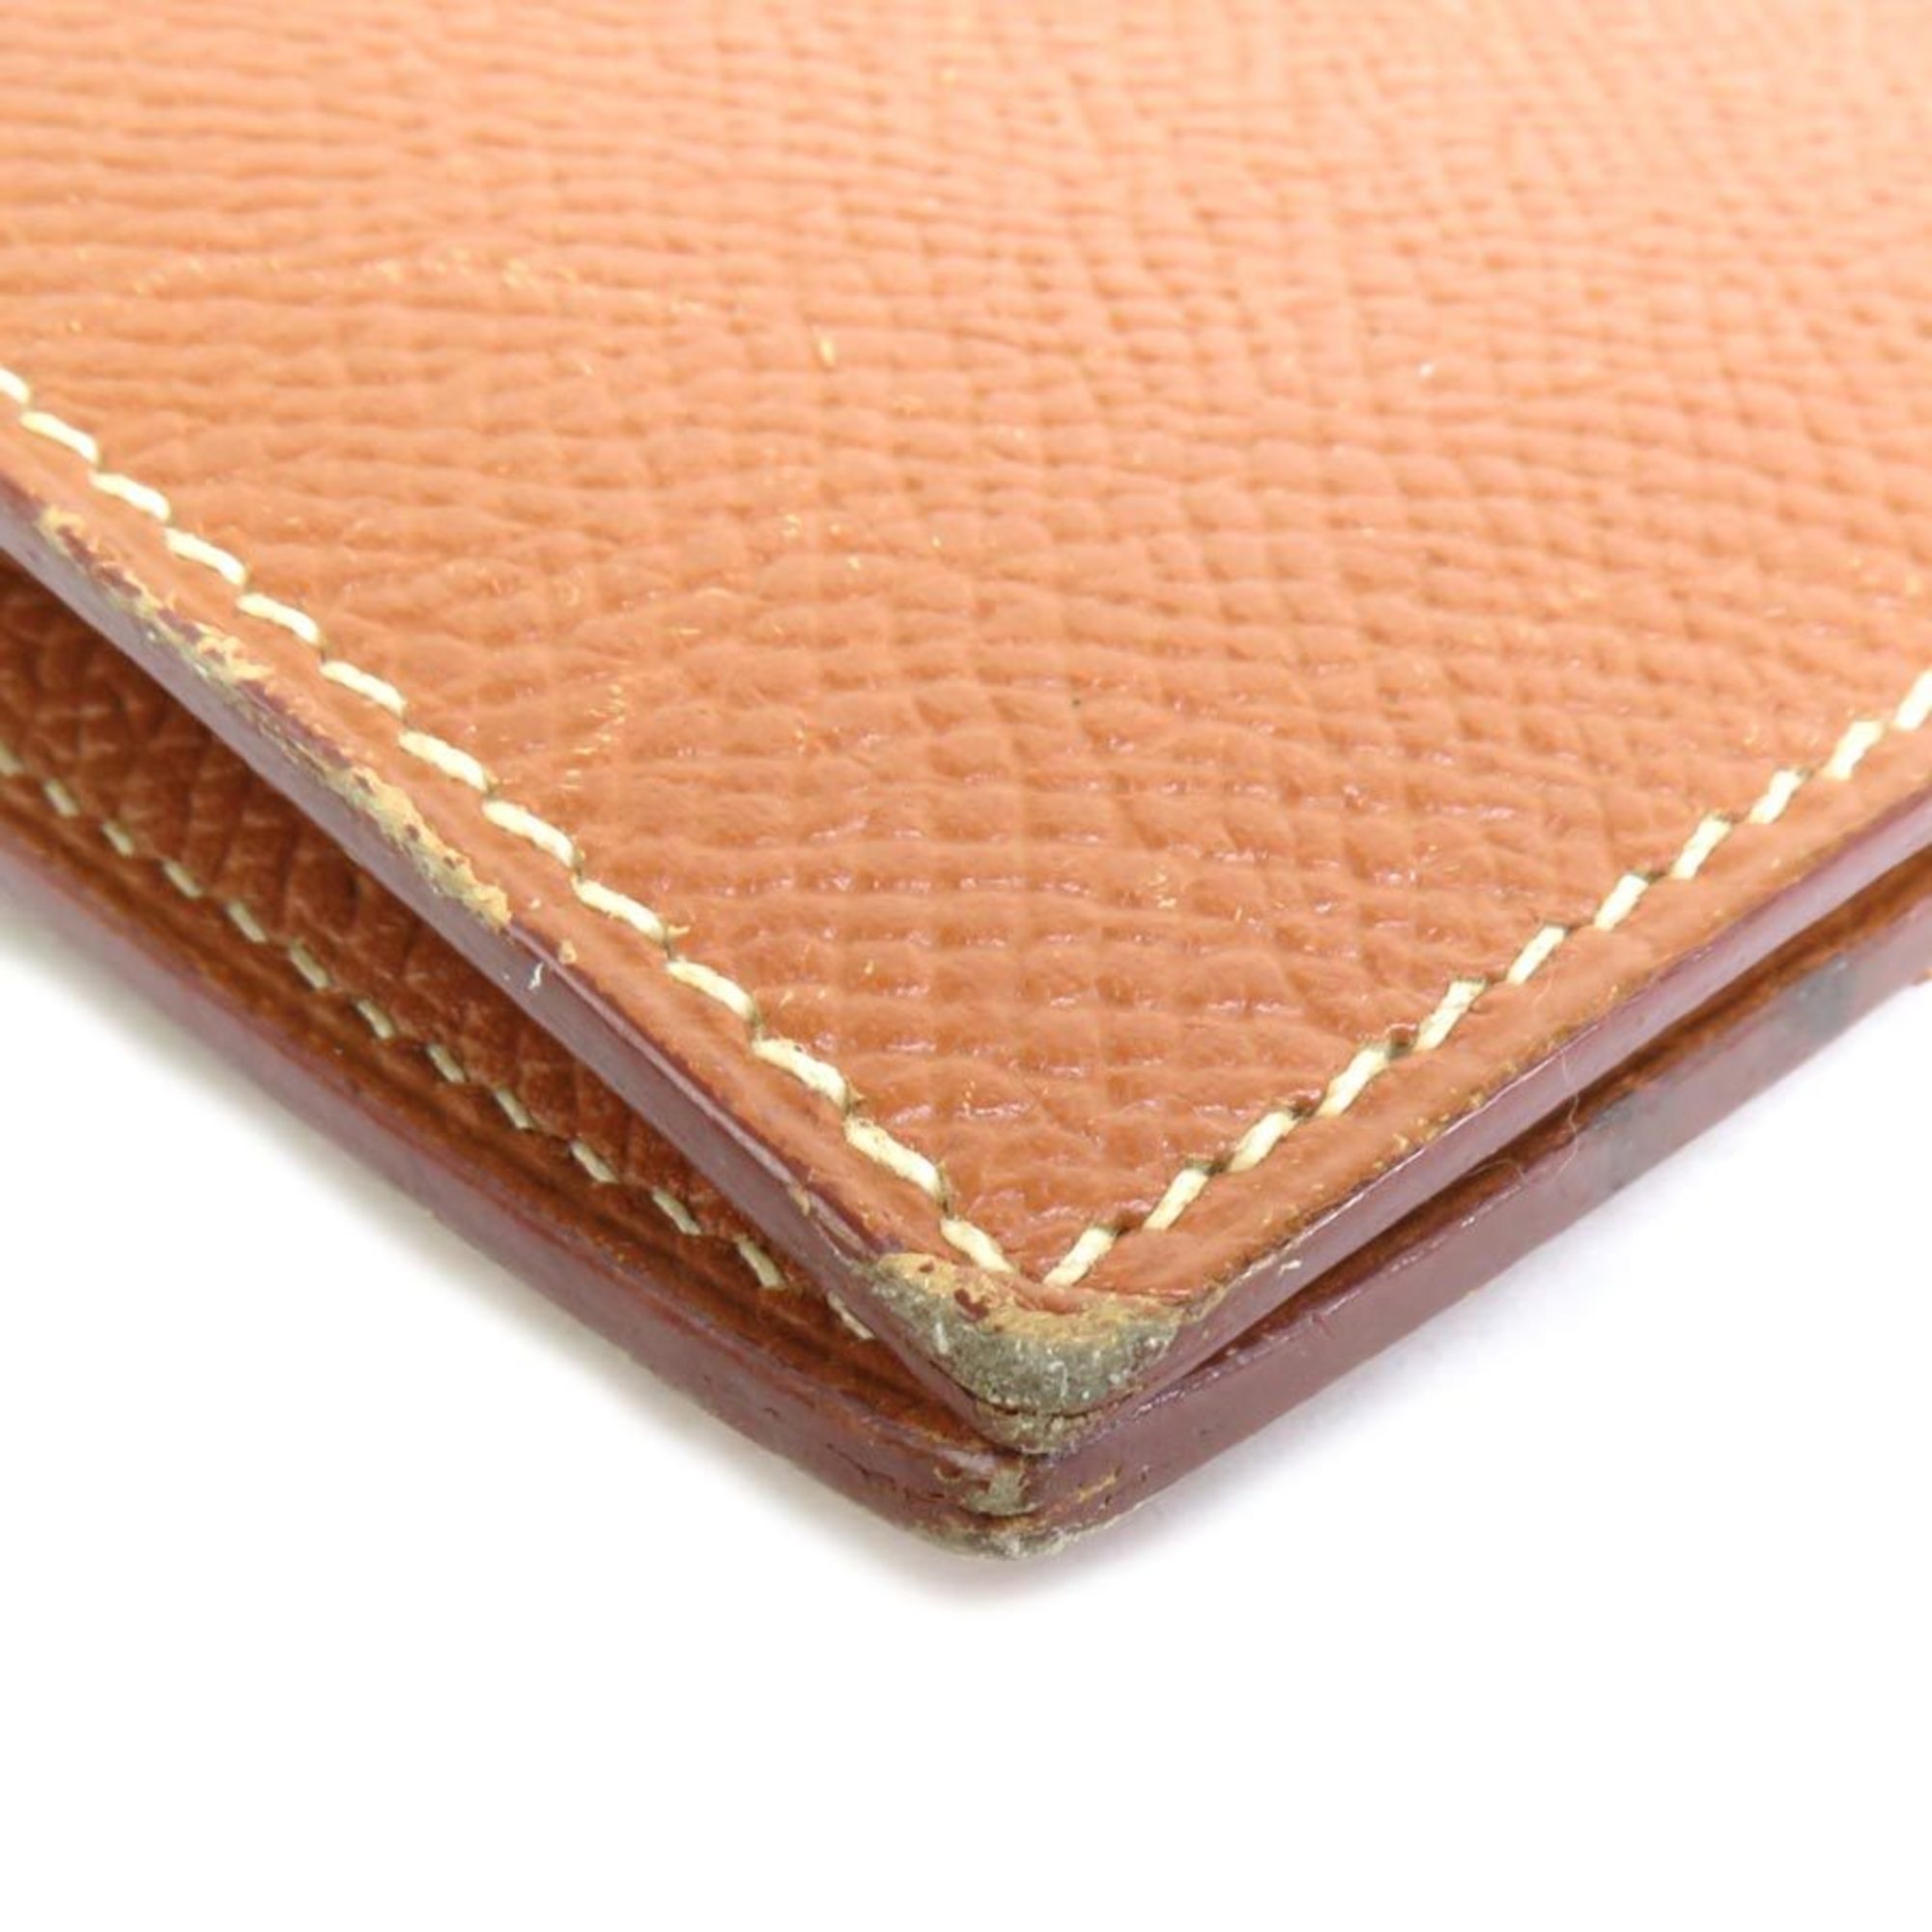 Hermes Notebook Cover Leather Brown Unisex